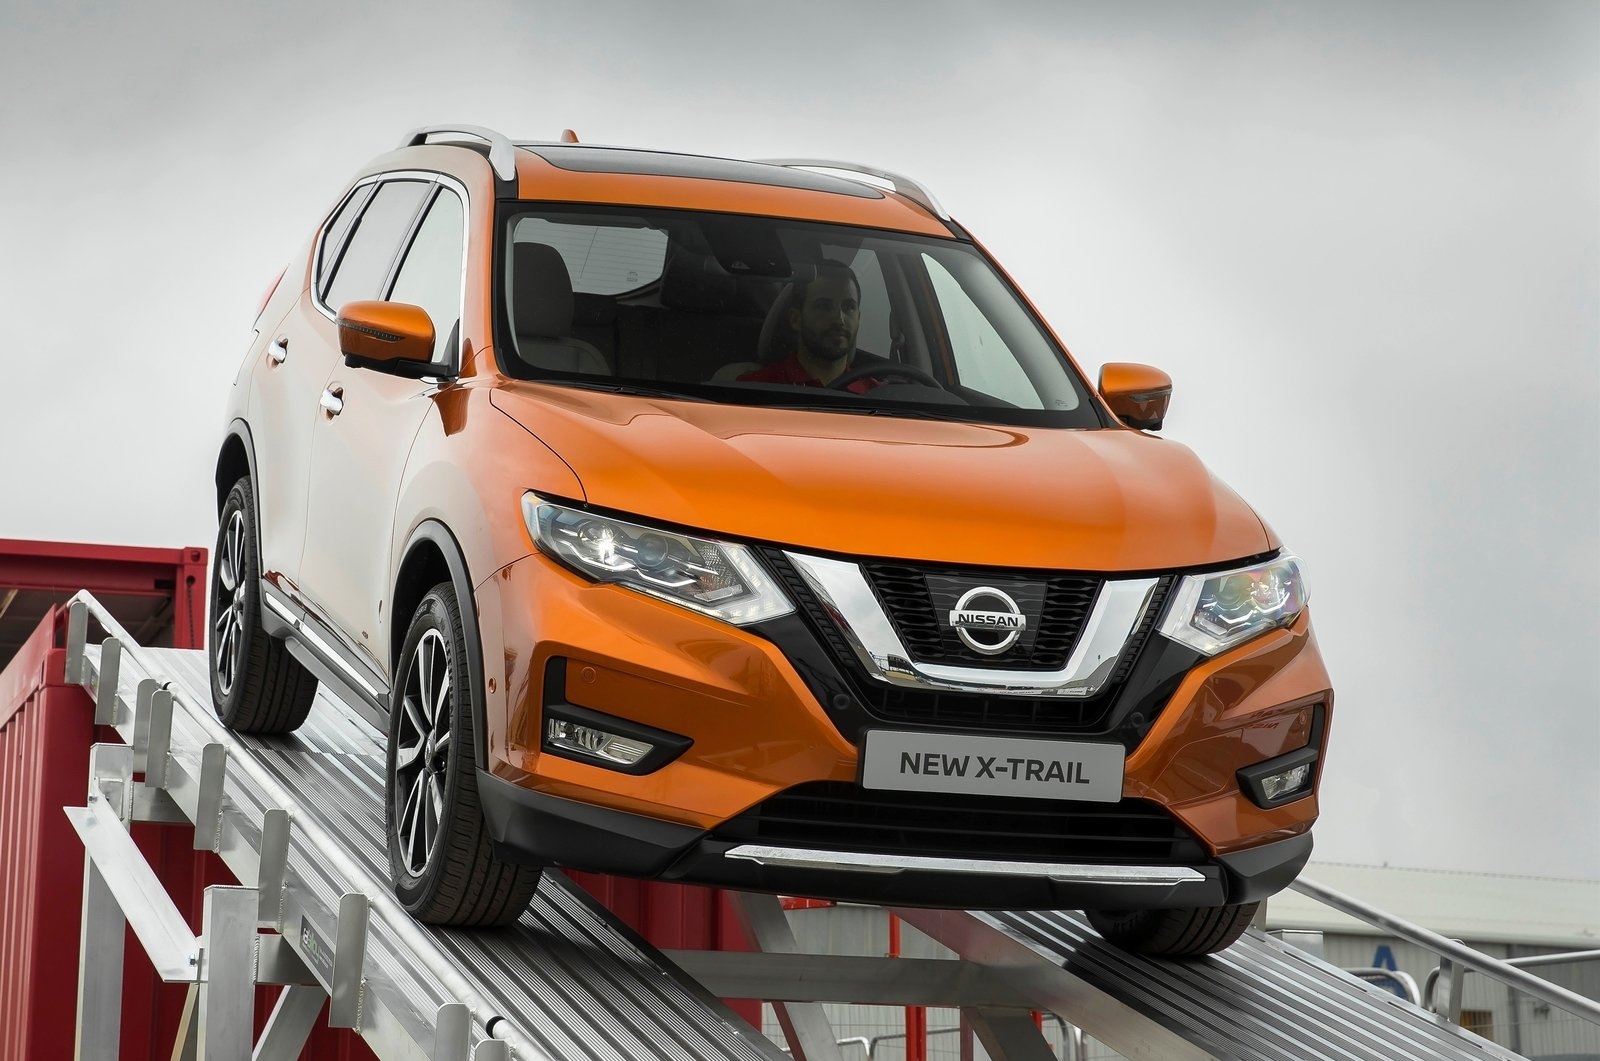 The new Nissan X-Trail is not from England